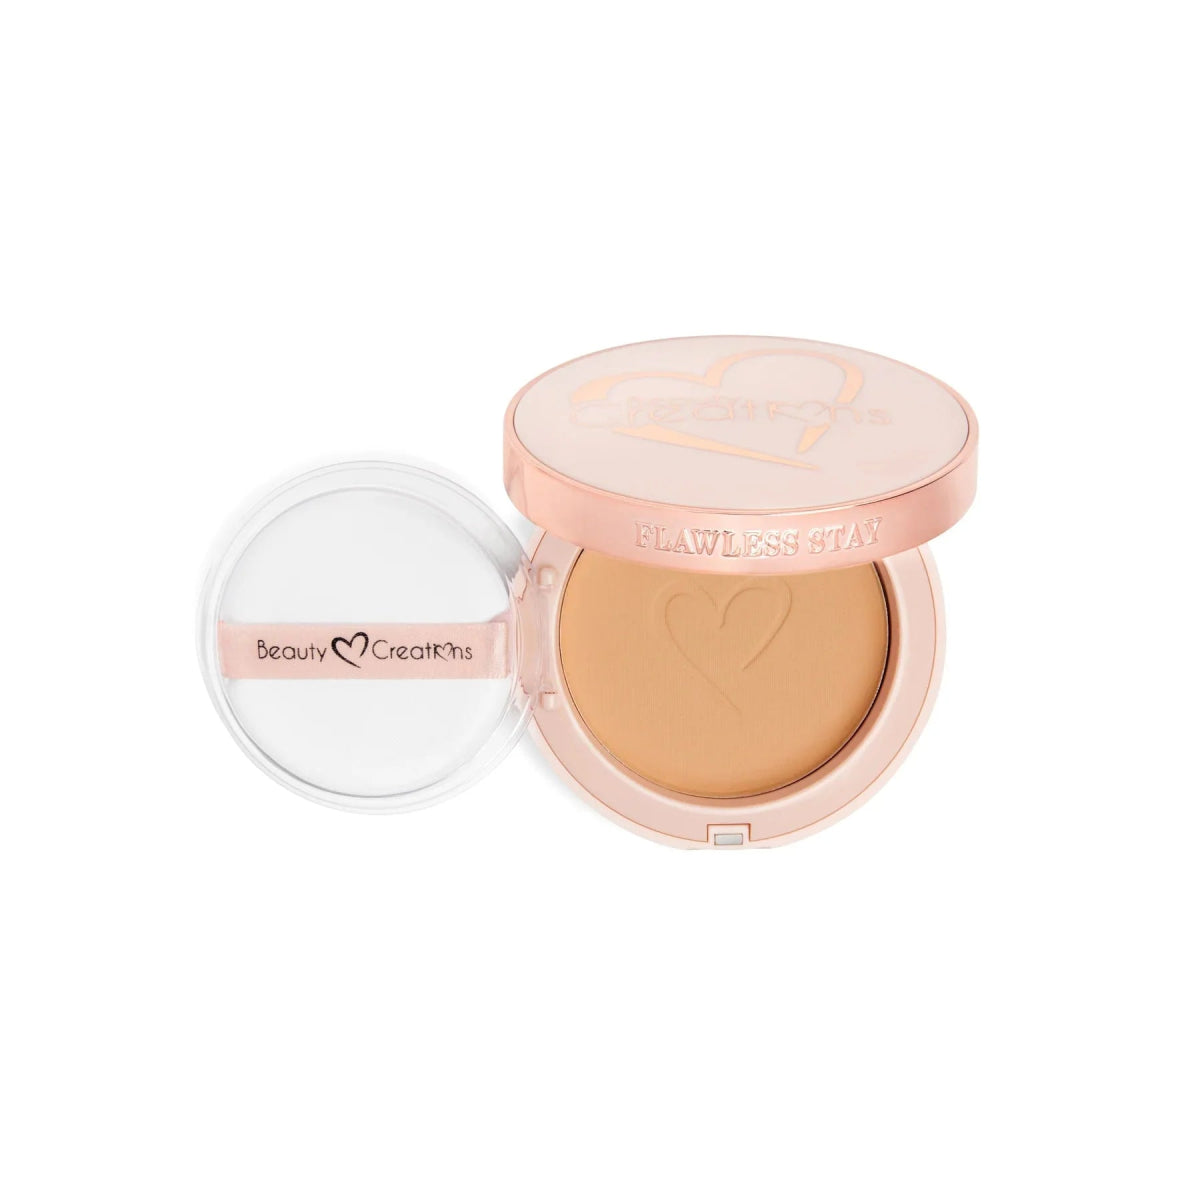 BCC Backup-Cosmetics-Beauty Creations - Base En Polvo Flawless Stay - Polvo Compacto-FSP8.5